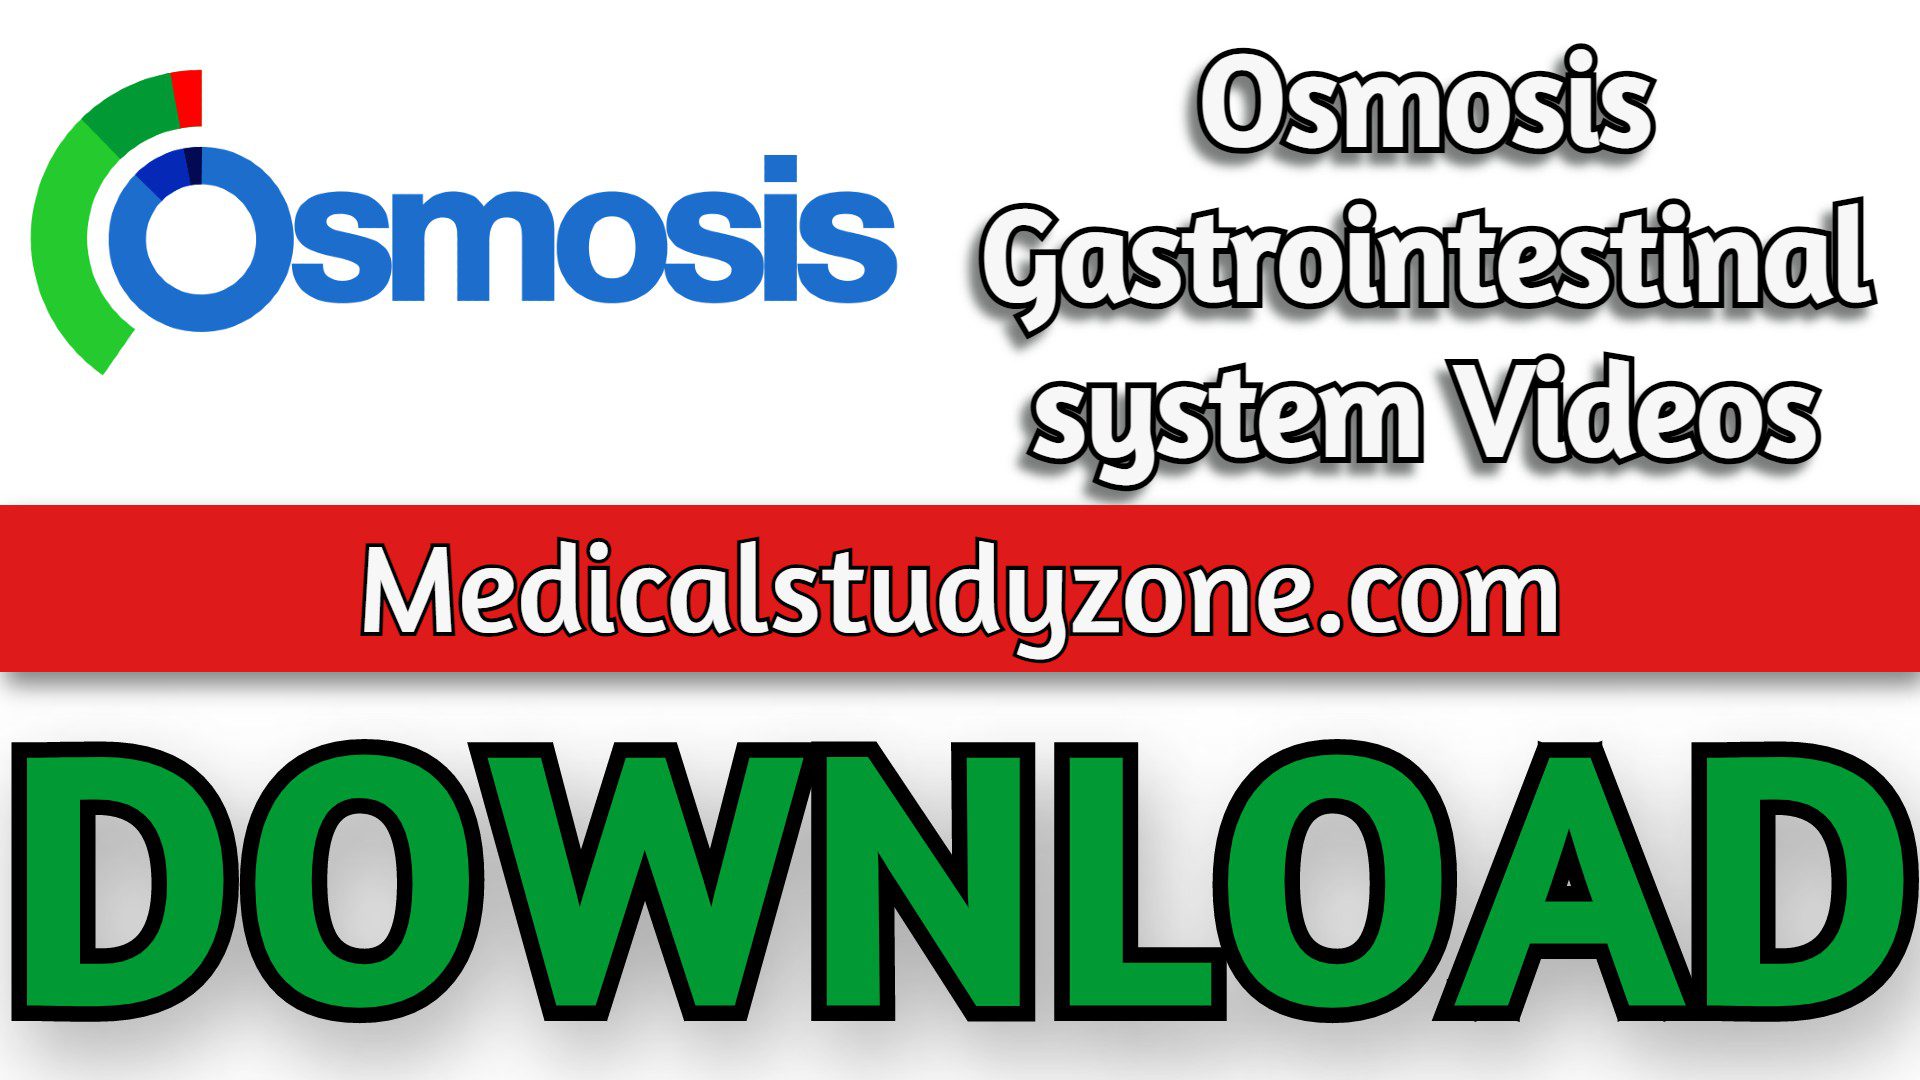 Osmosis Gastrointestinal system Videos 2023 Free Download